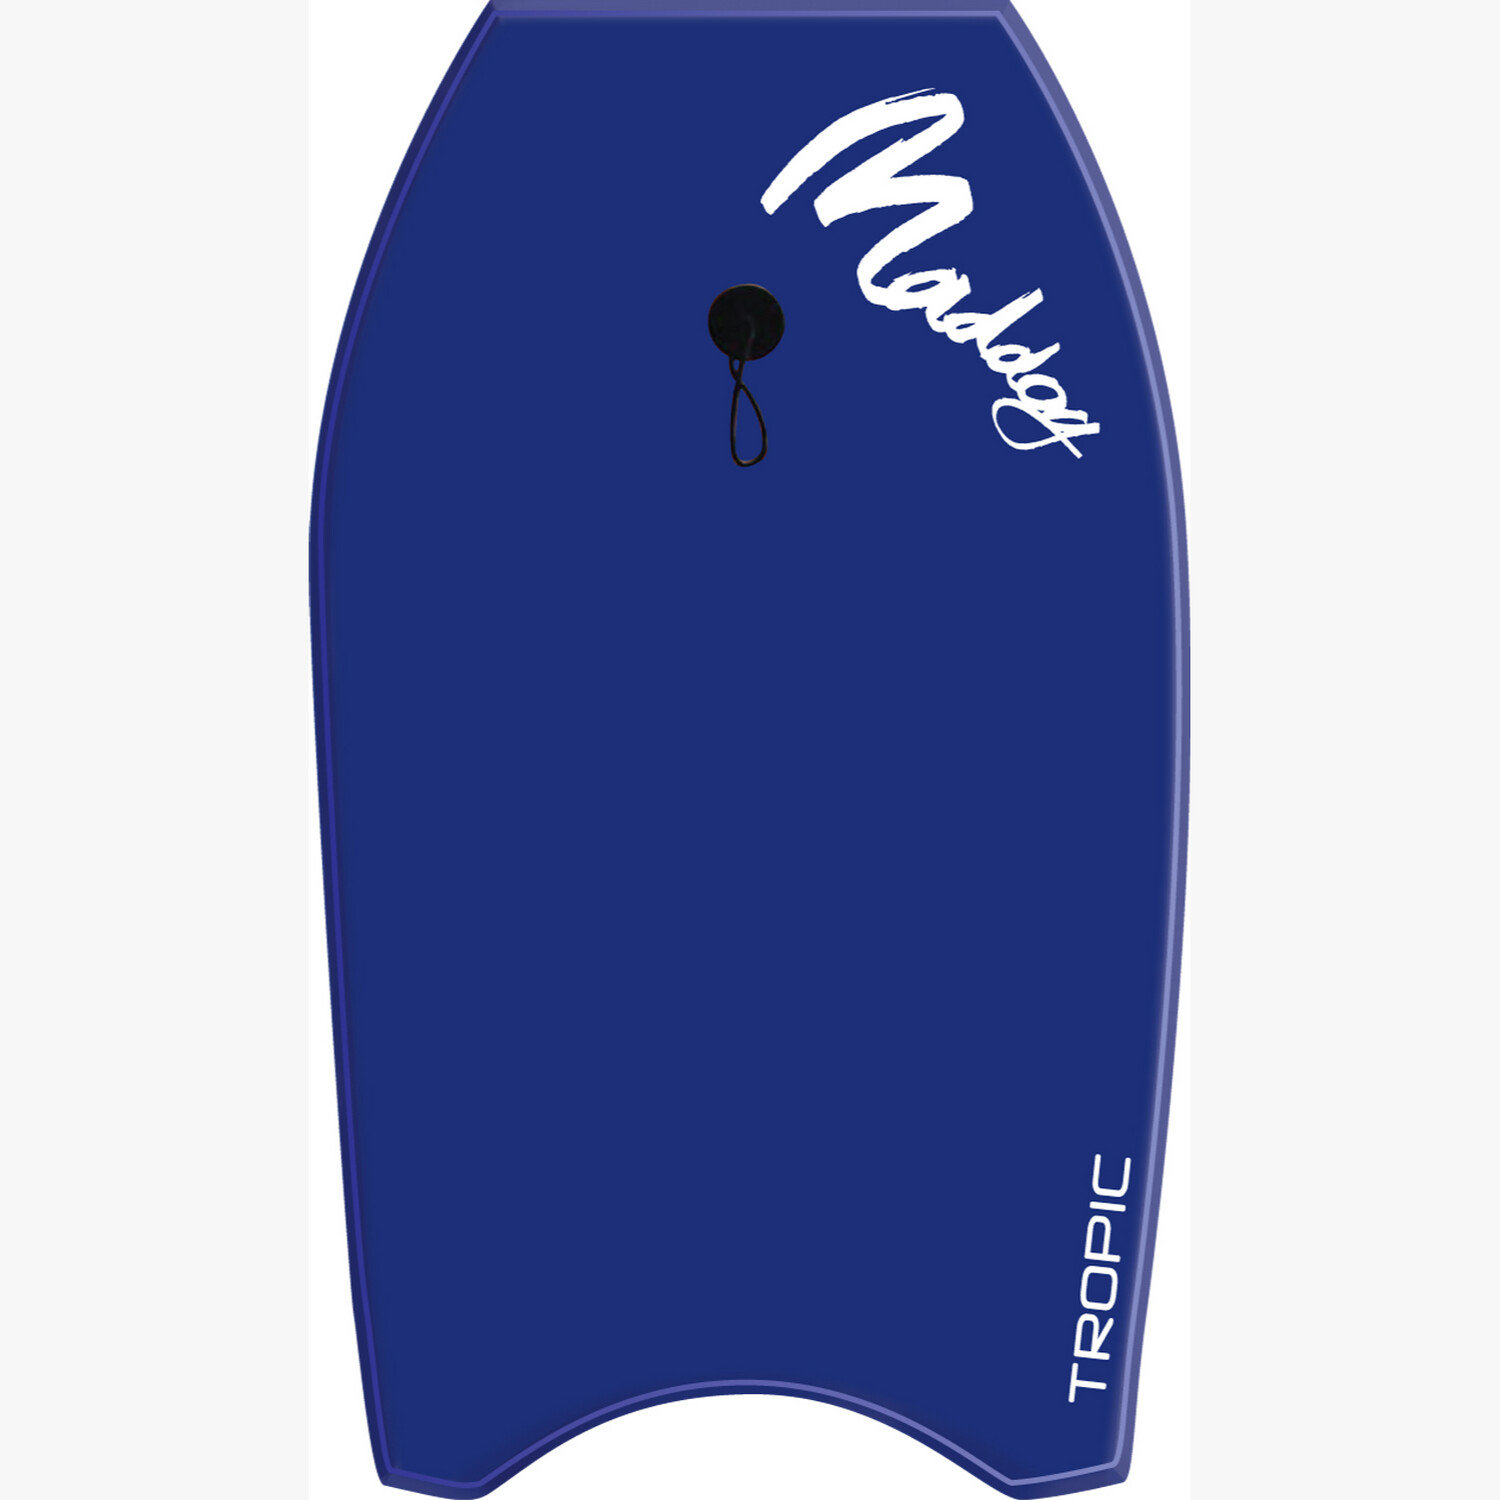 Maddog Tropic body board 41" Blue (Instore Only)